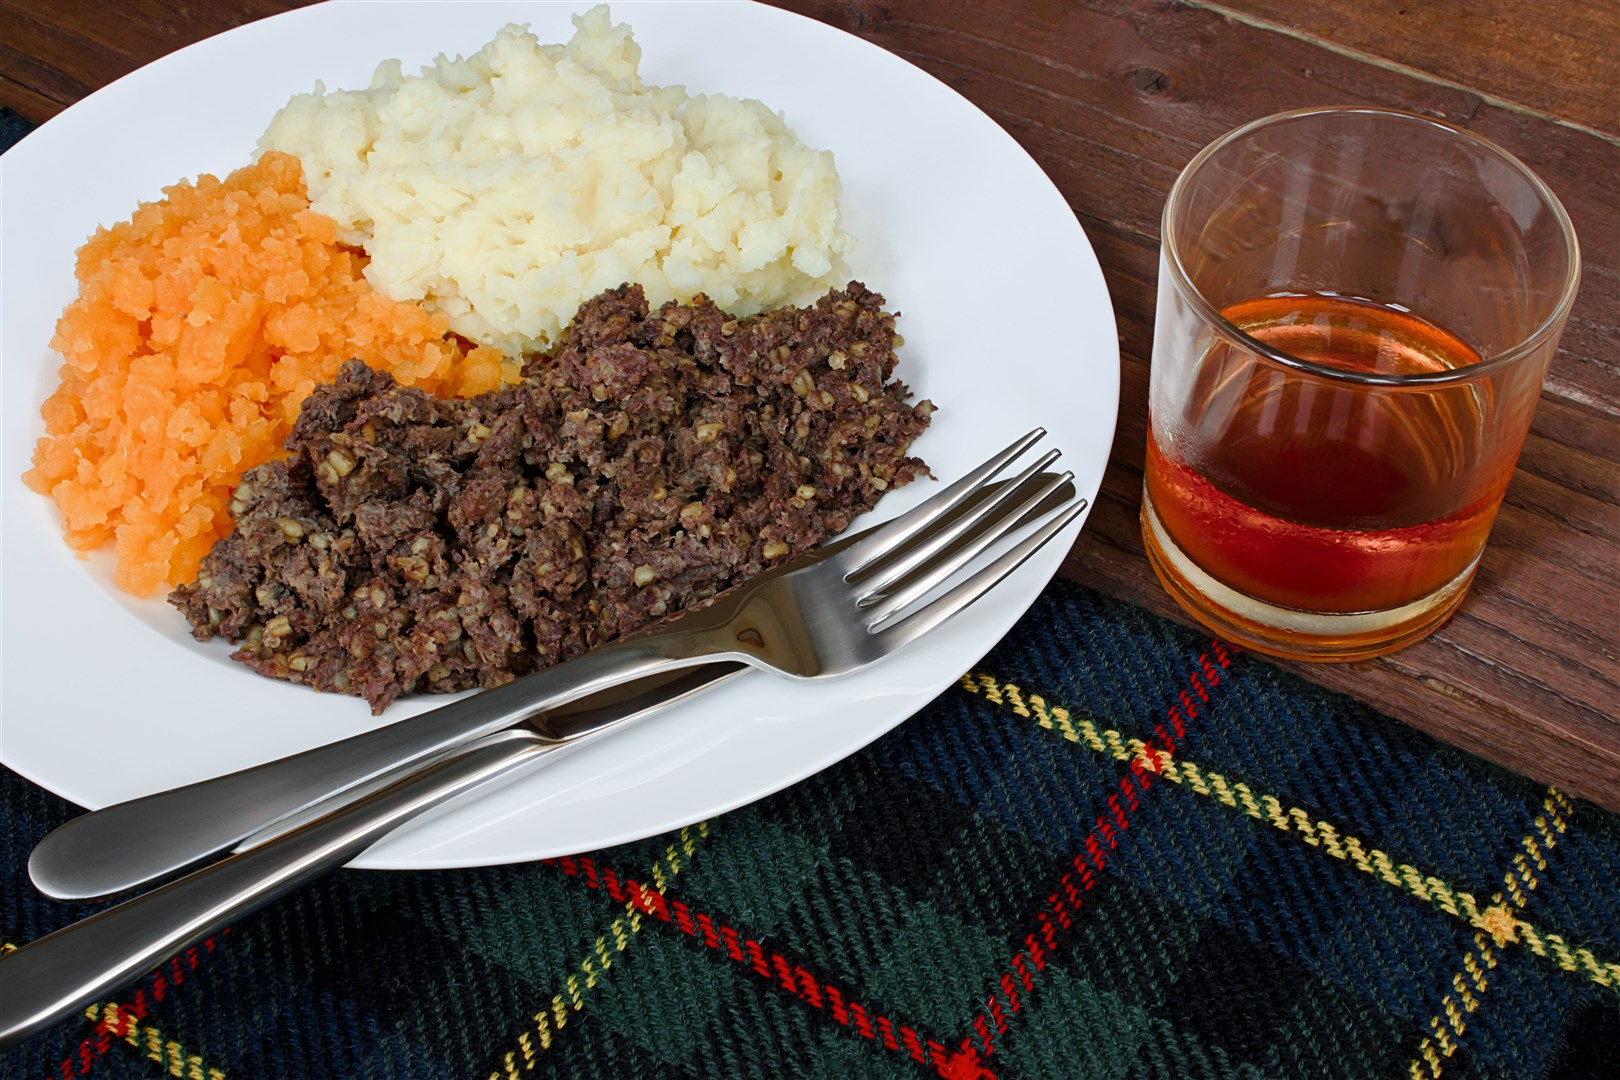 Haggis, neeps and tatties with a dram.